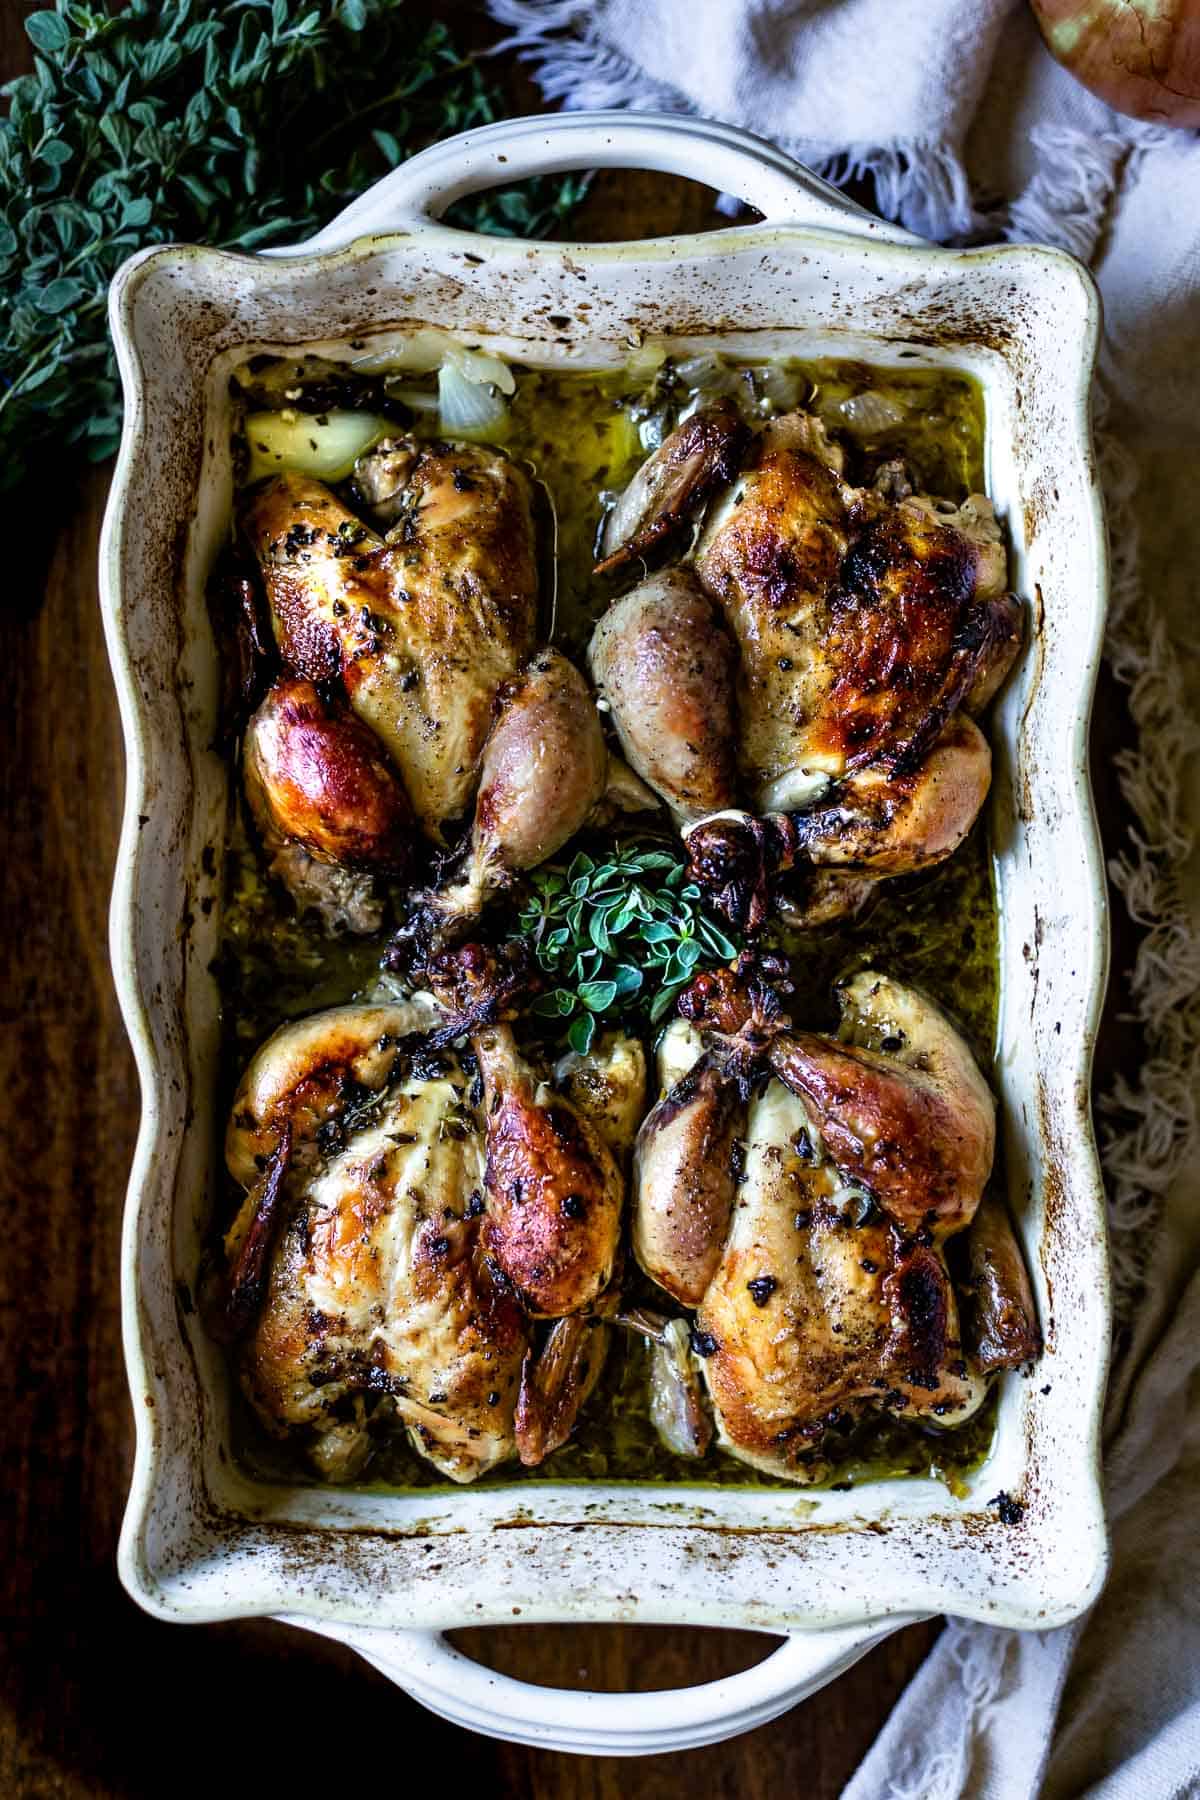 Roasted cornish hens in a casserole dish from the top view.